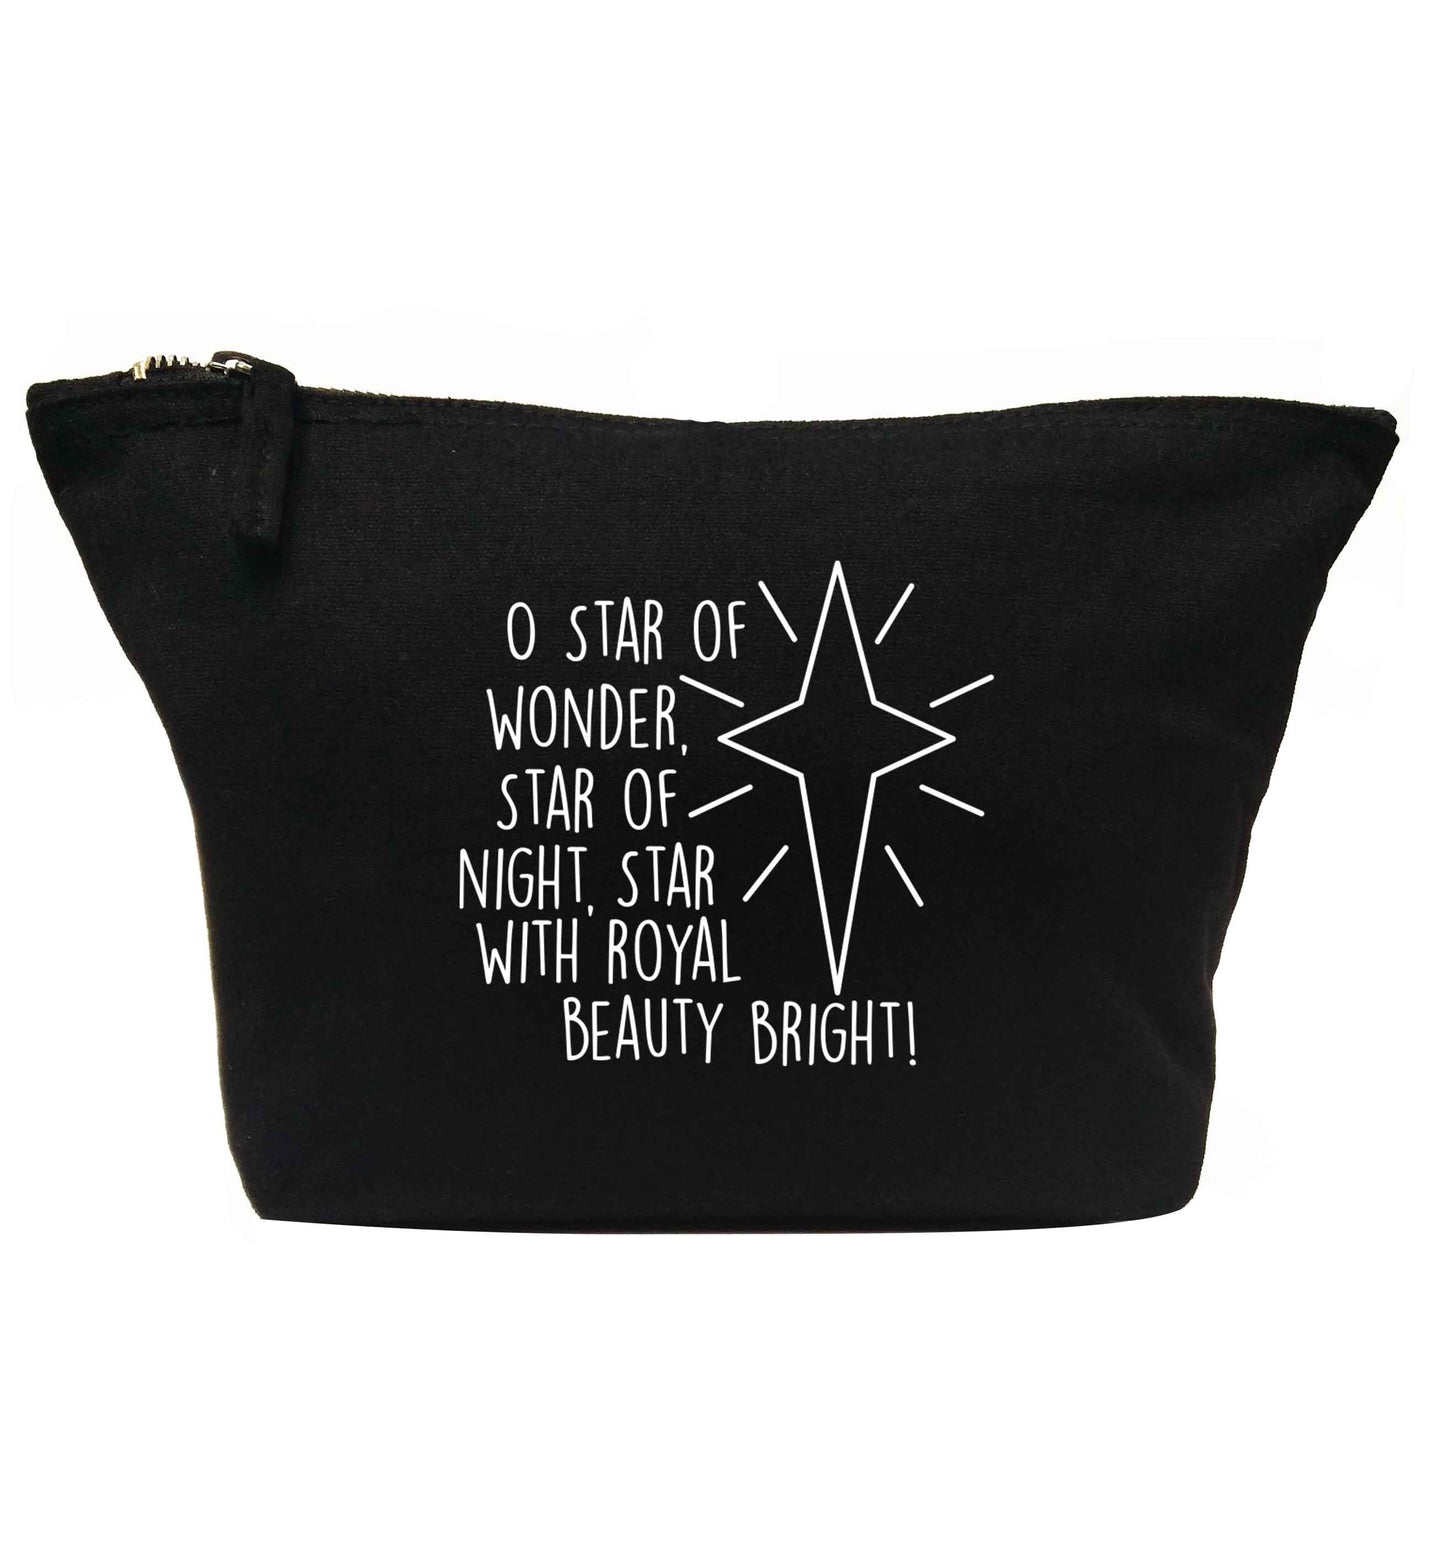 Oh star of wonder star of night, star with royal beauty bright | Makeup / wash bag